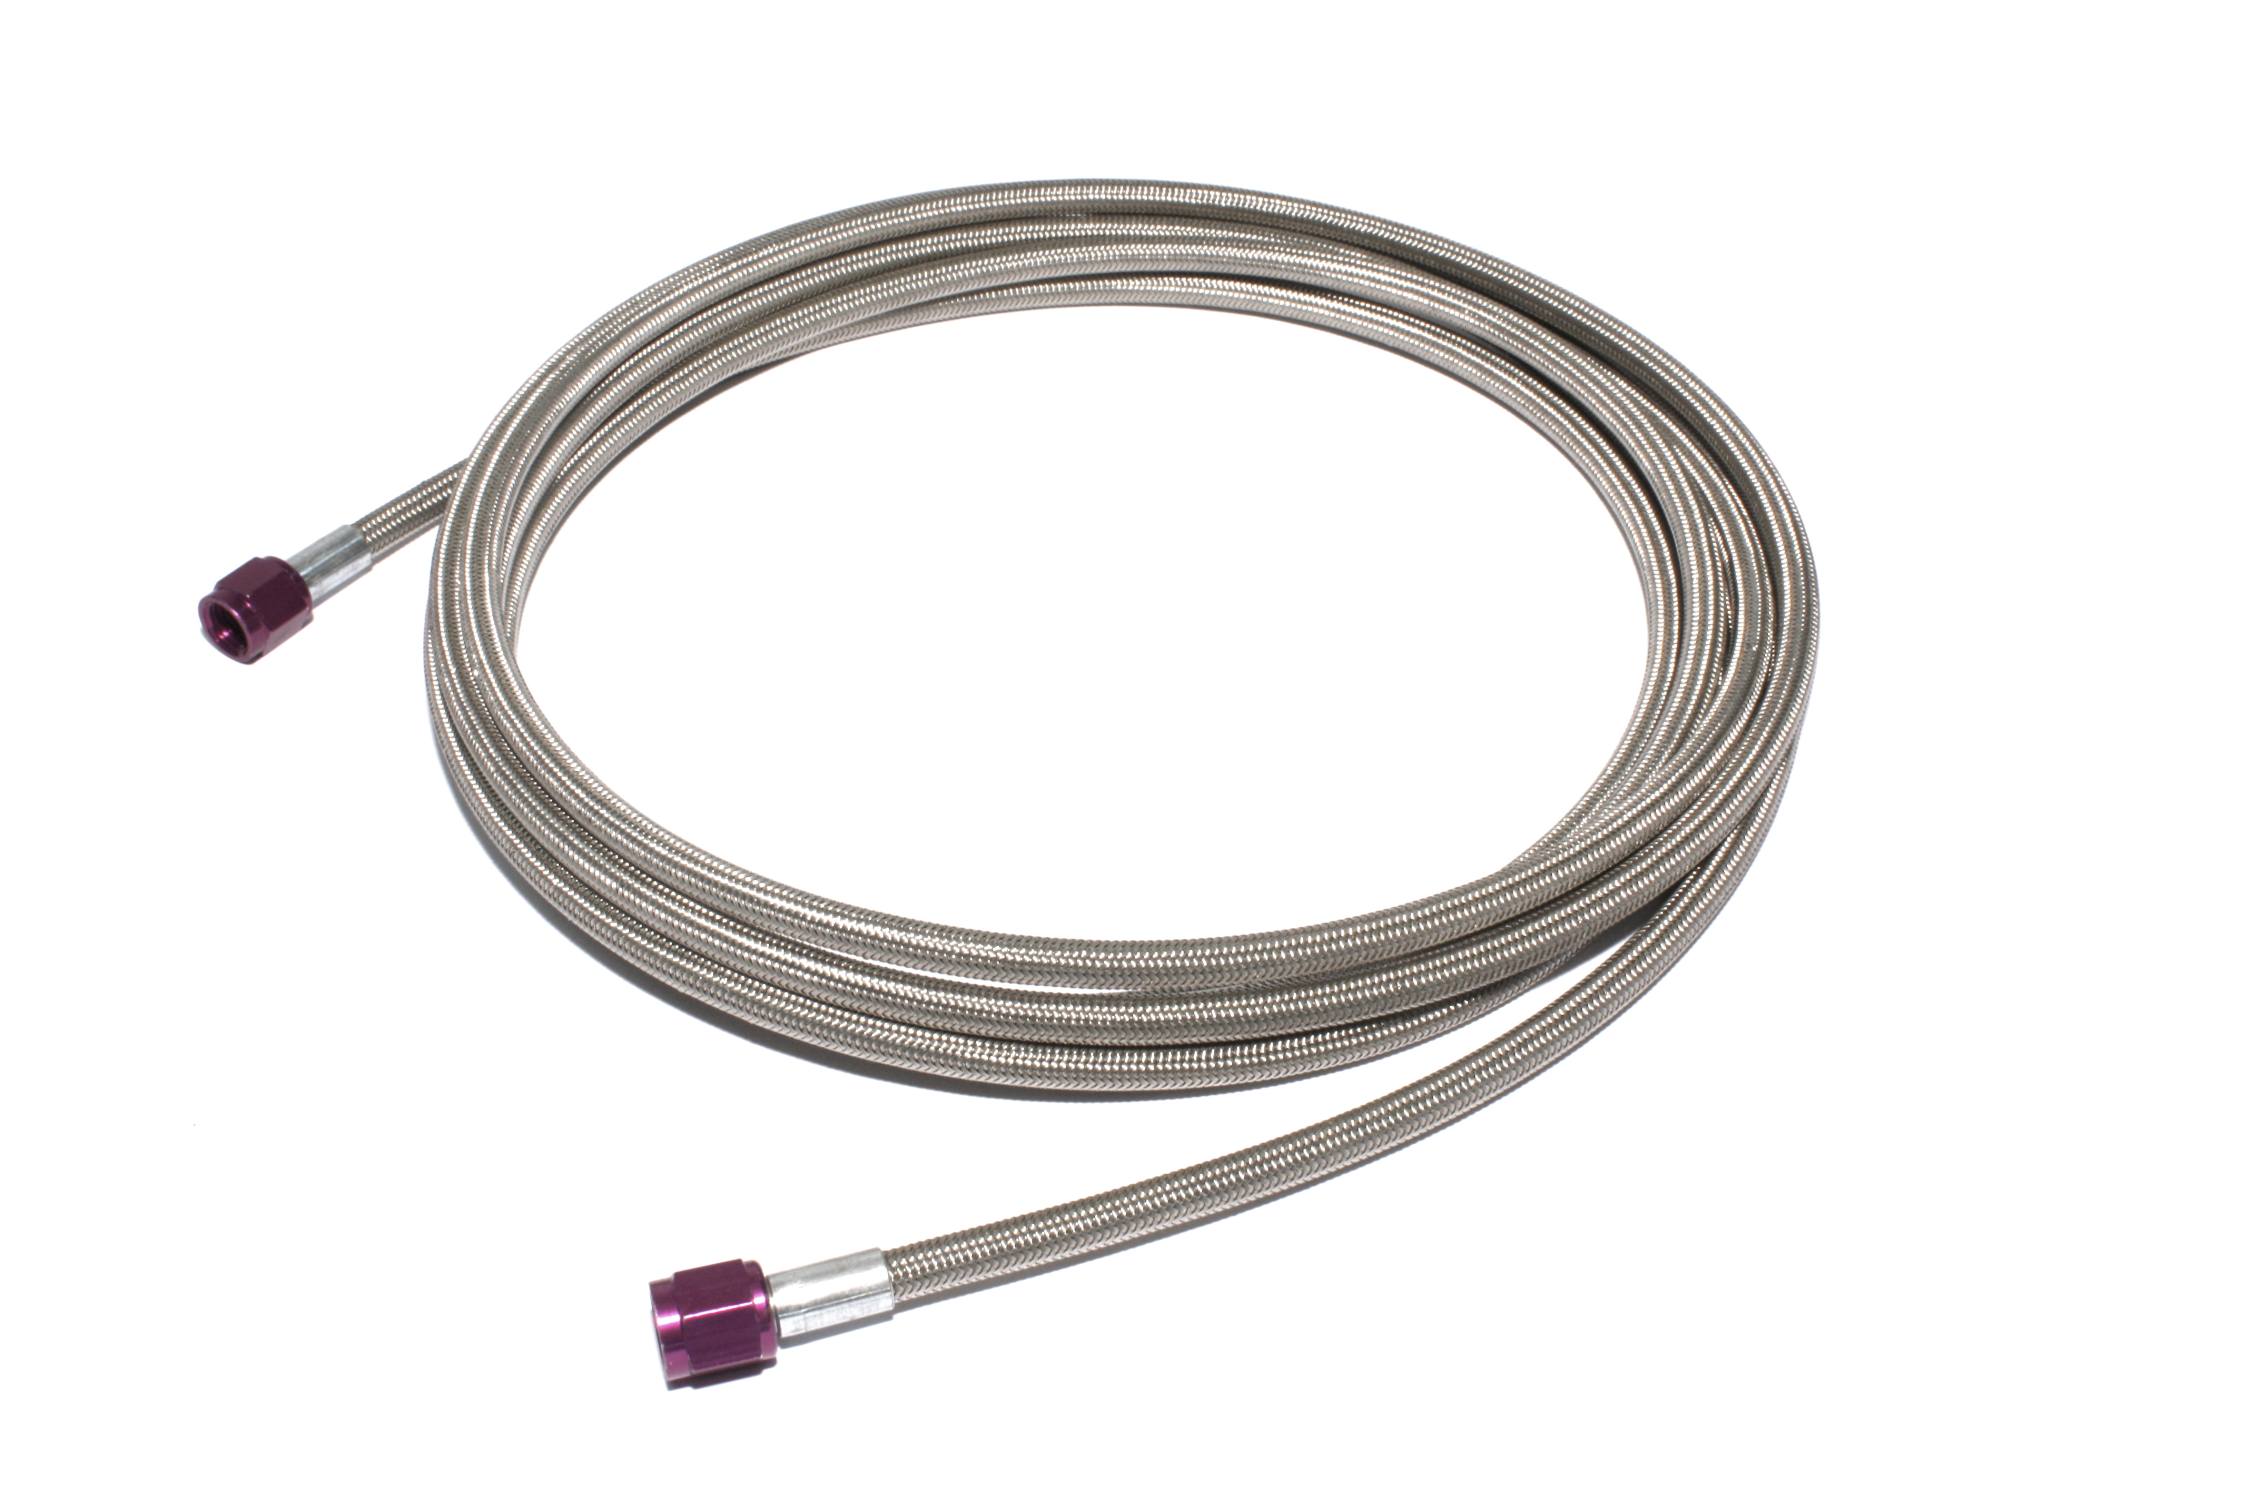 ZEX 14' (ft) Long -4AN Braided Hose with Purple Ends., 4AN 14', Corvette, Camaro and others